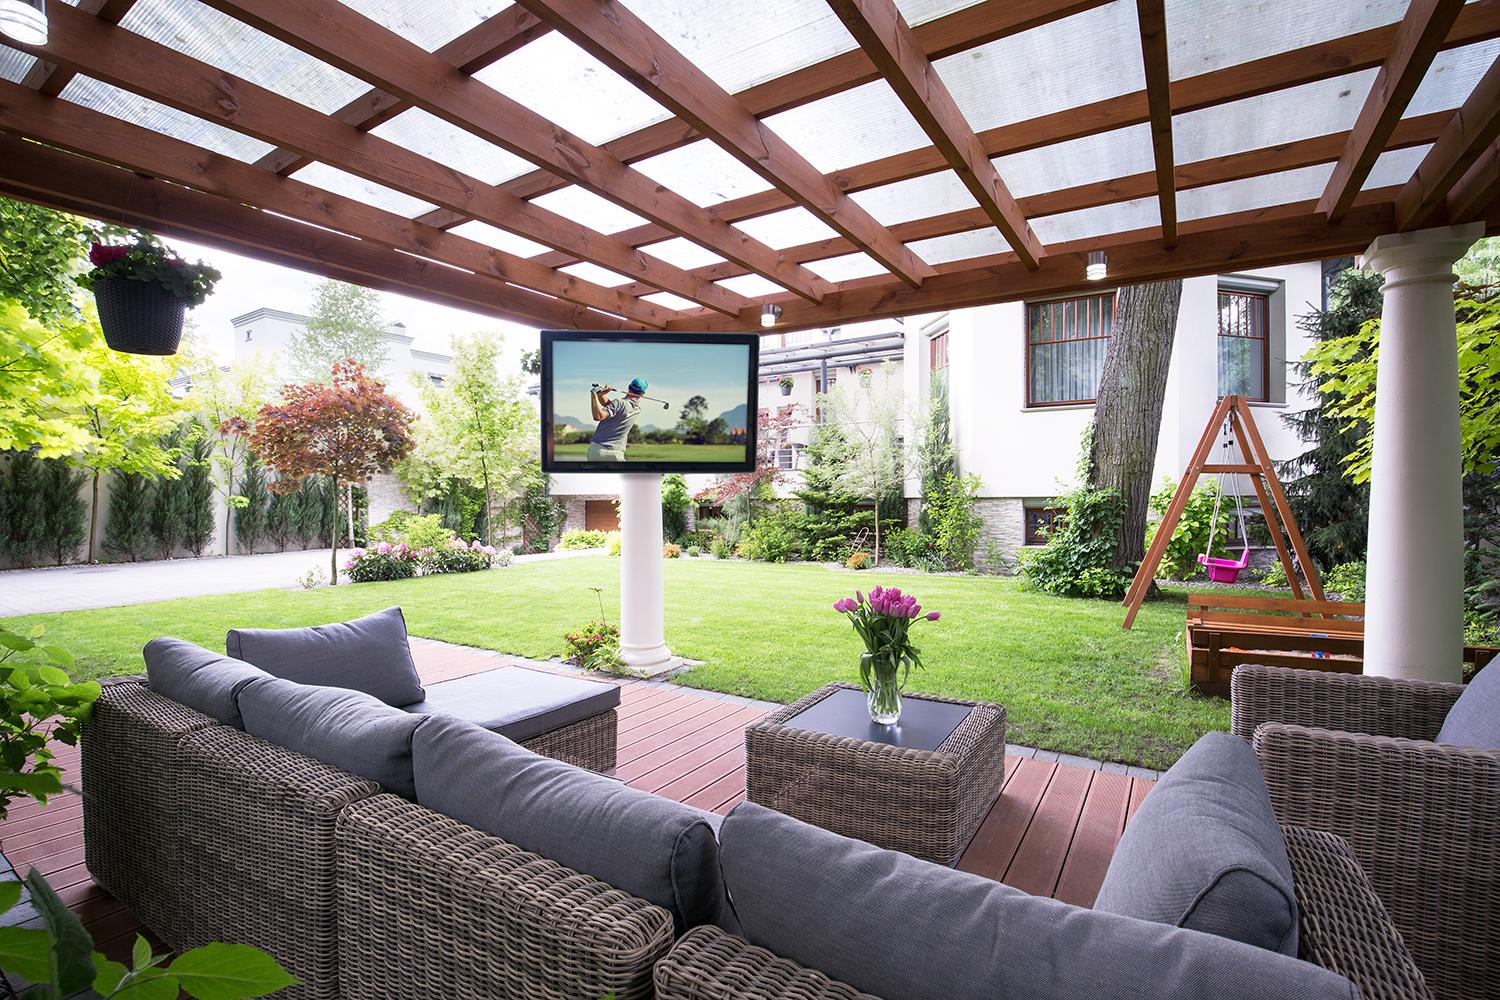 Detached Patio Checklist: How to Weatherproof Your Outdoor Living Space and Enjoy the Best Patios